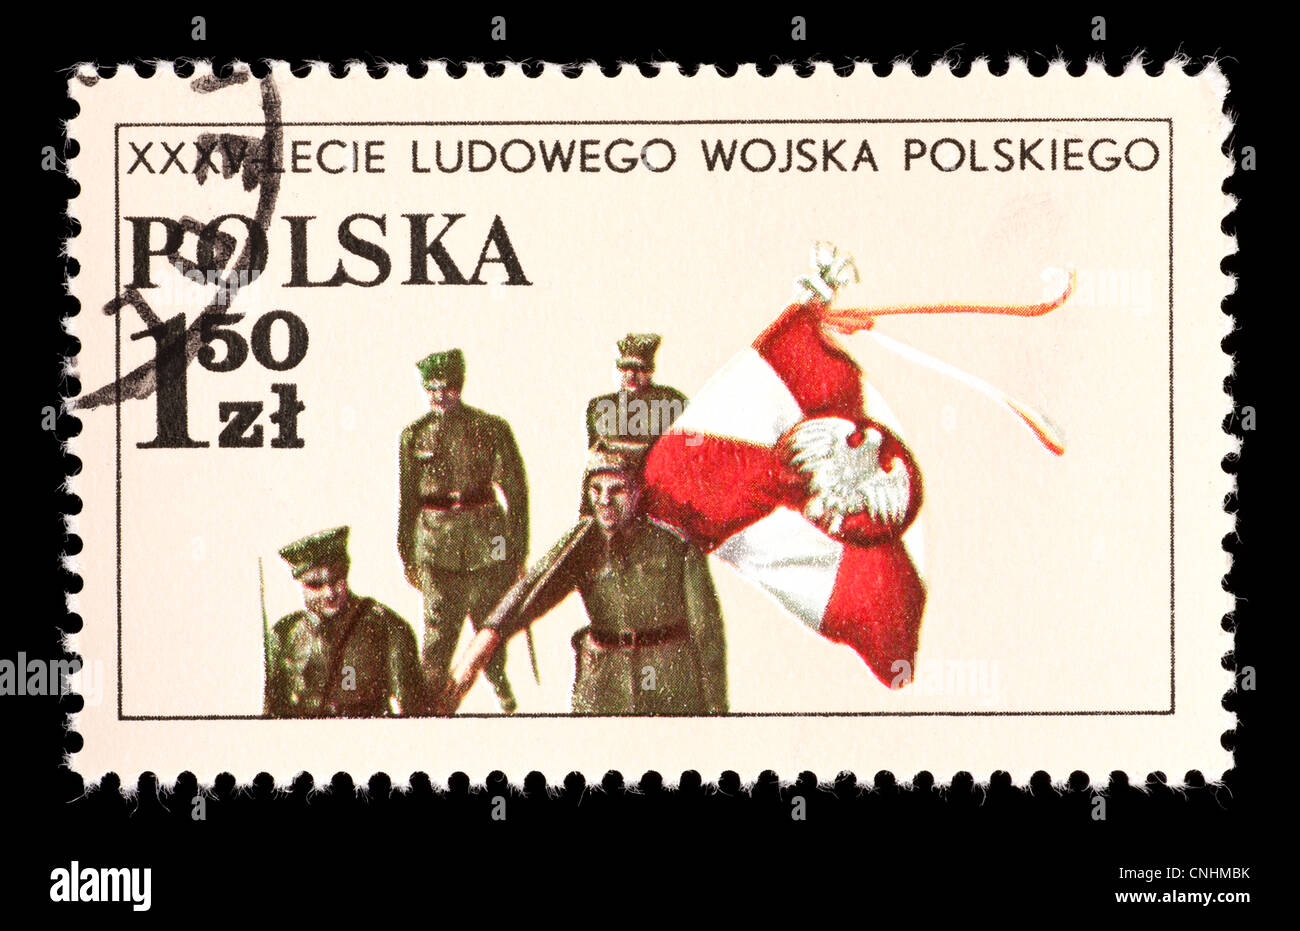 Postage stamp from Poland depicting an army color guard (Kosziusko Division), for the 35'th anniversary of the People's Army. Stock Photo